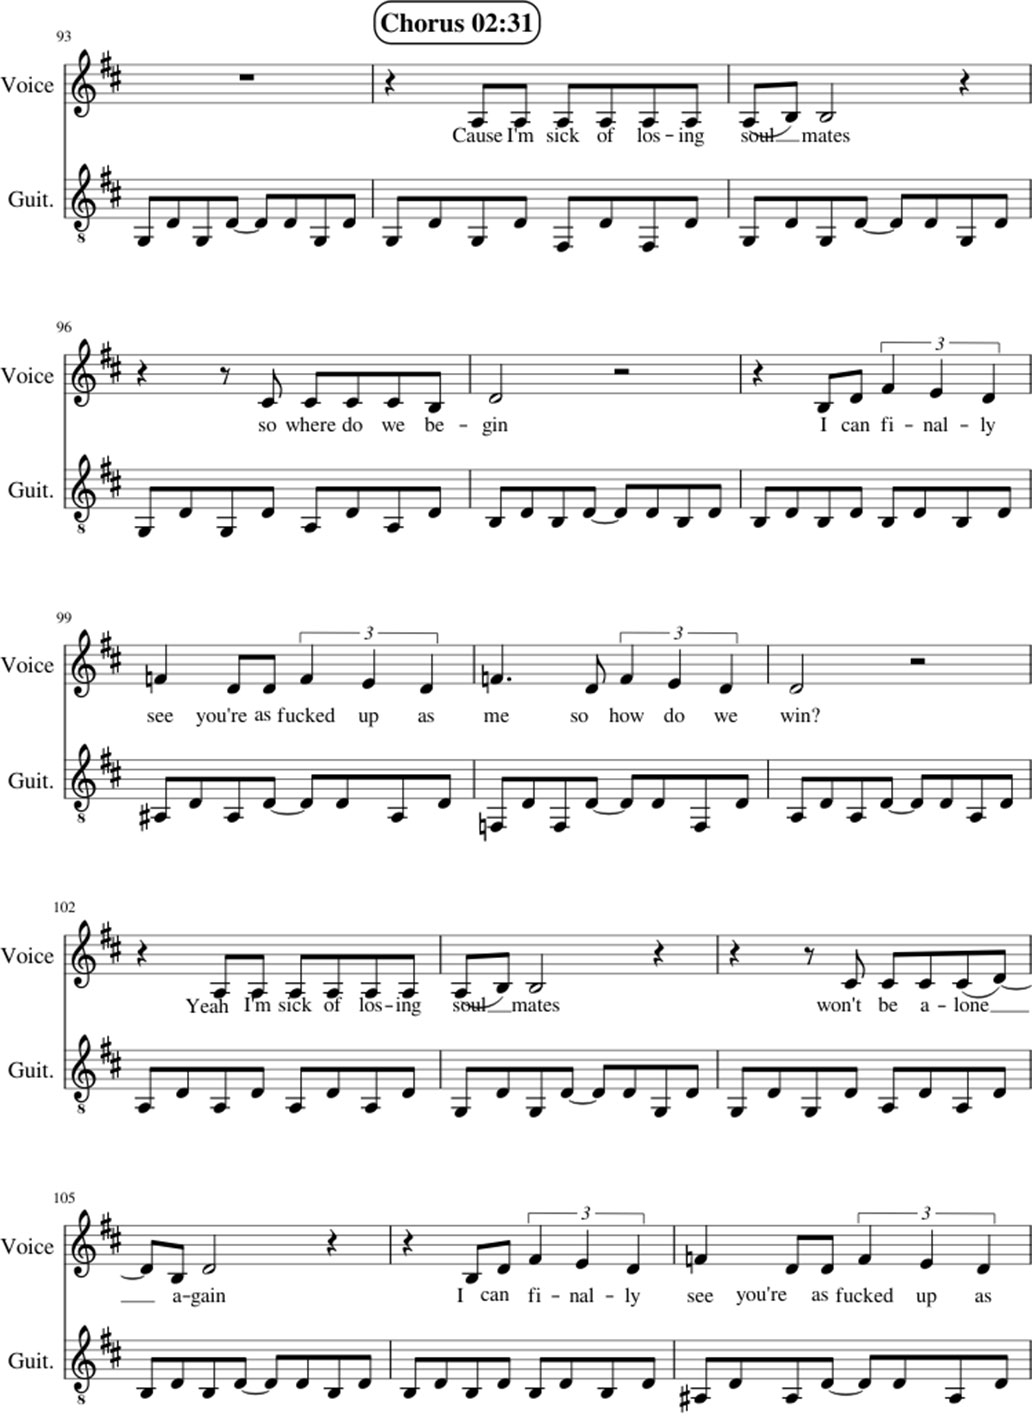 Sick of losing soulmate sheet music notes 6